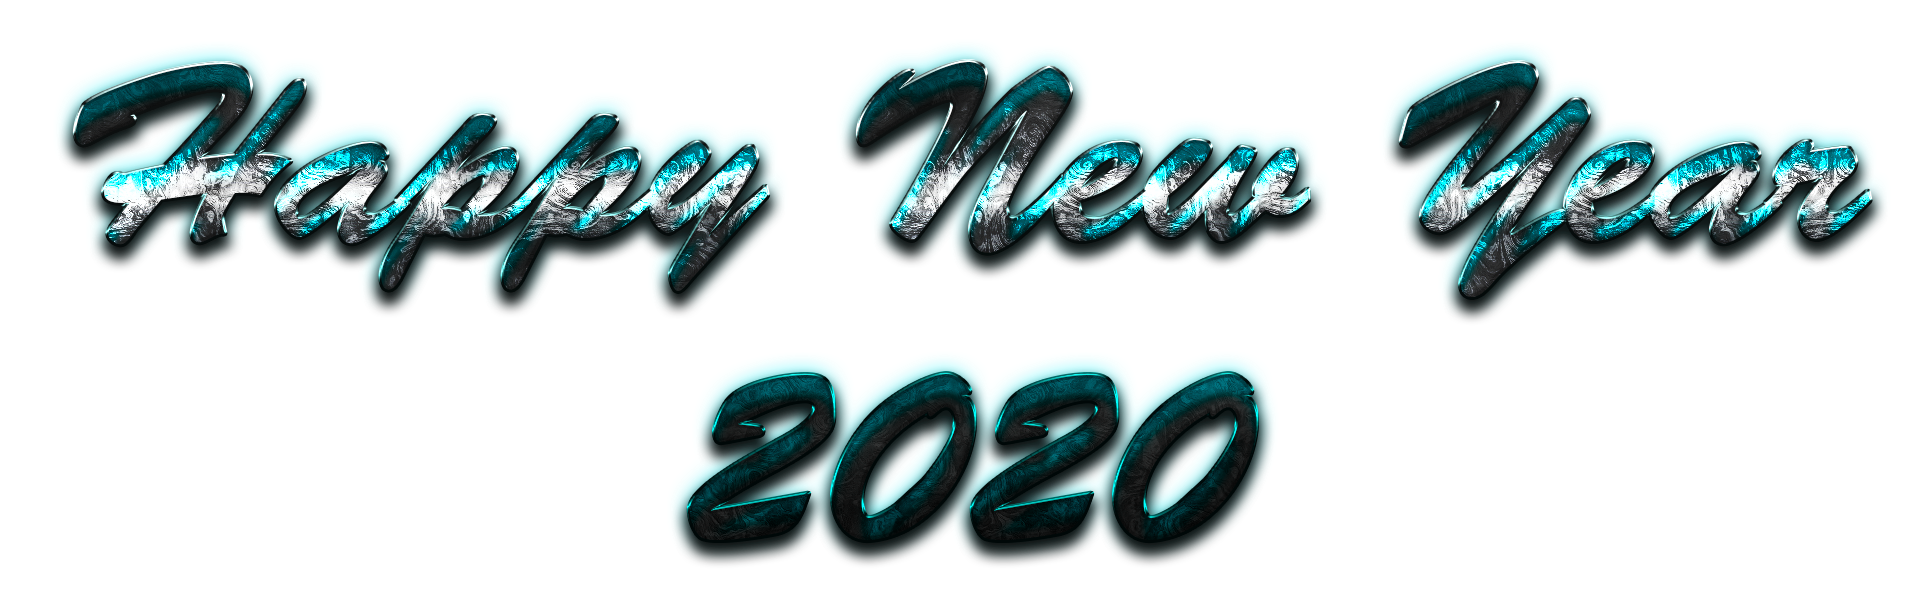 Happy New Year 2020 Free PNG Image